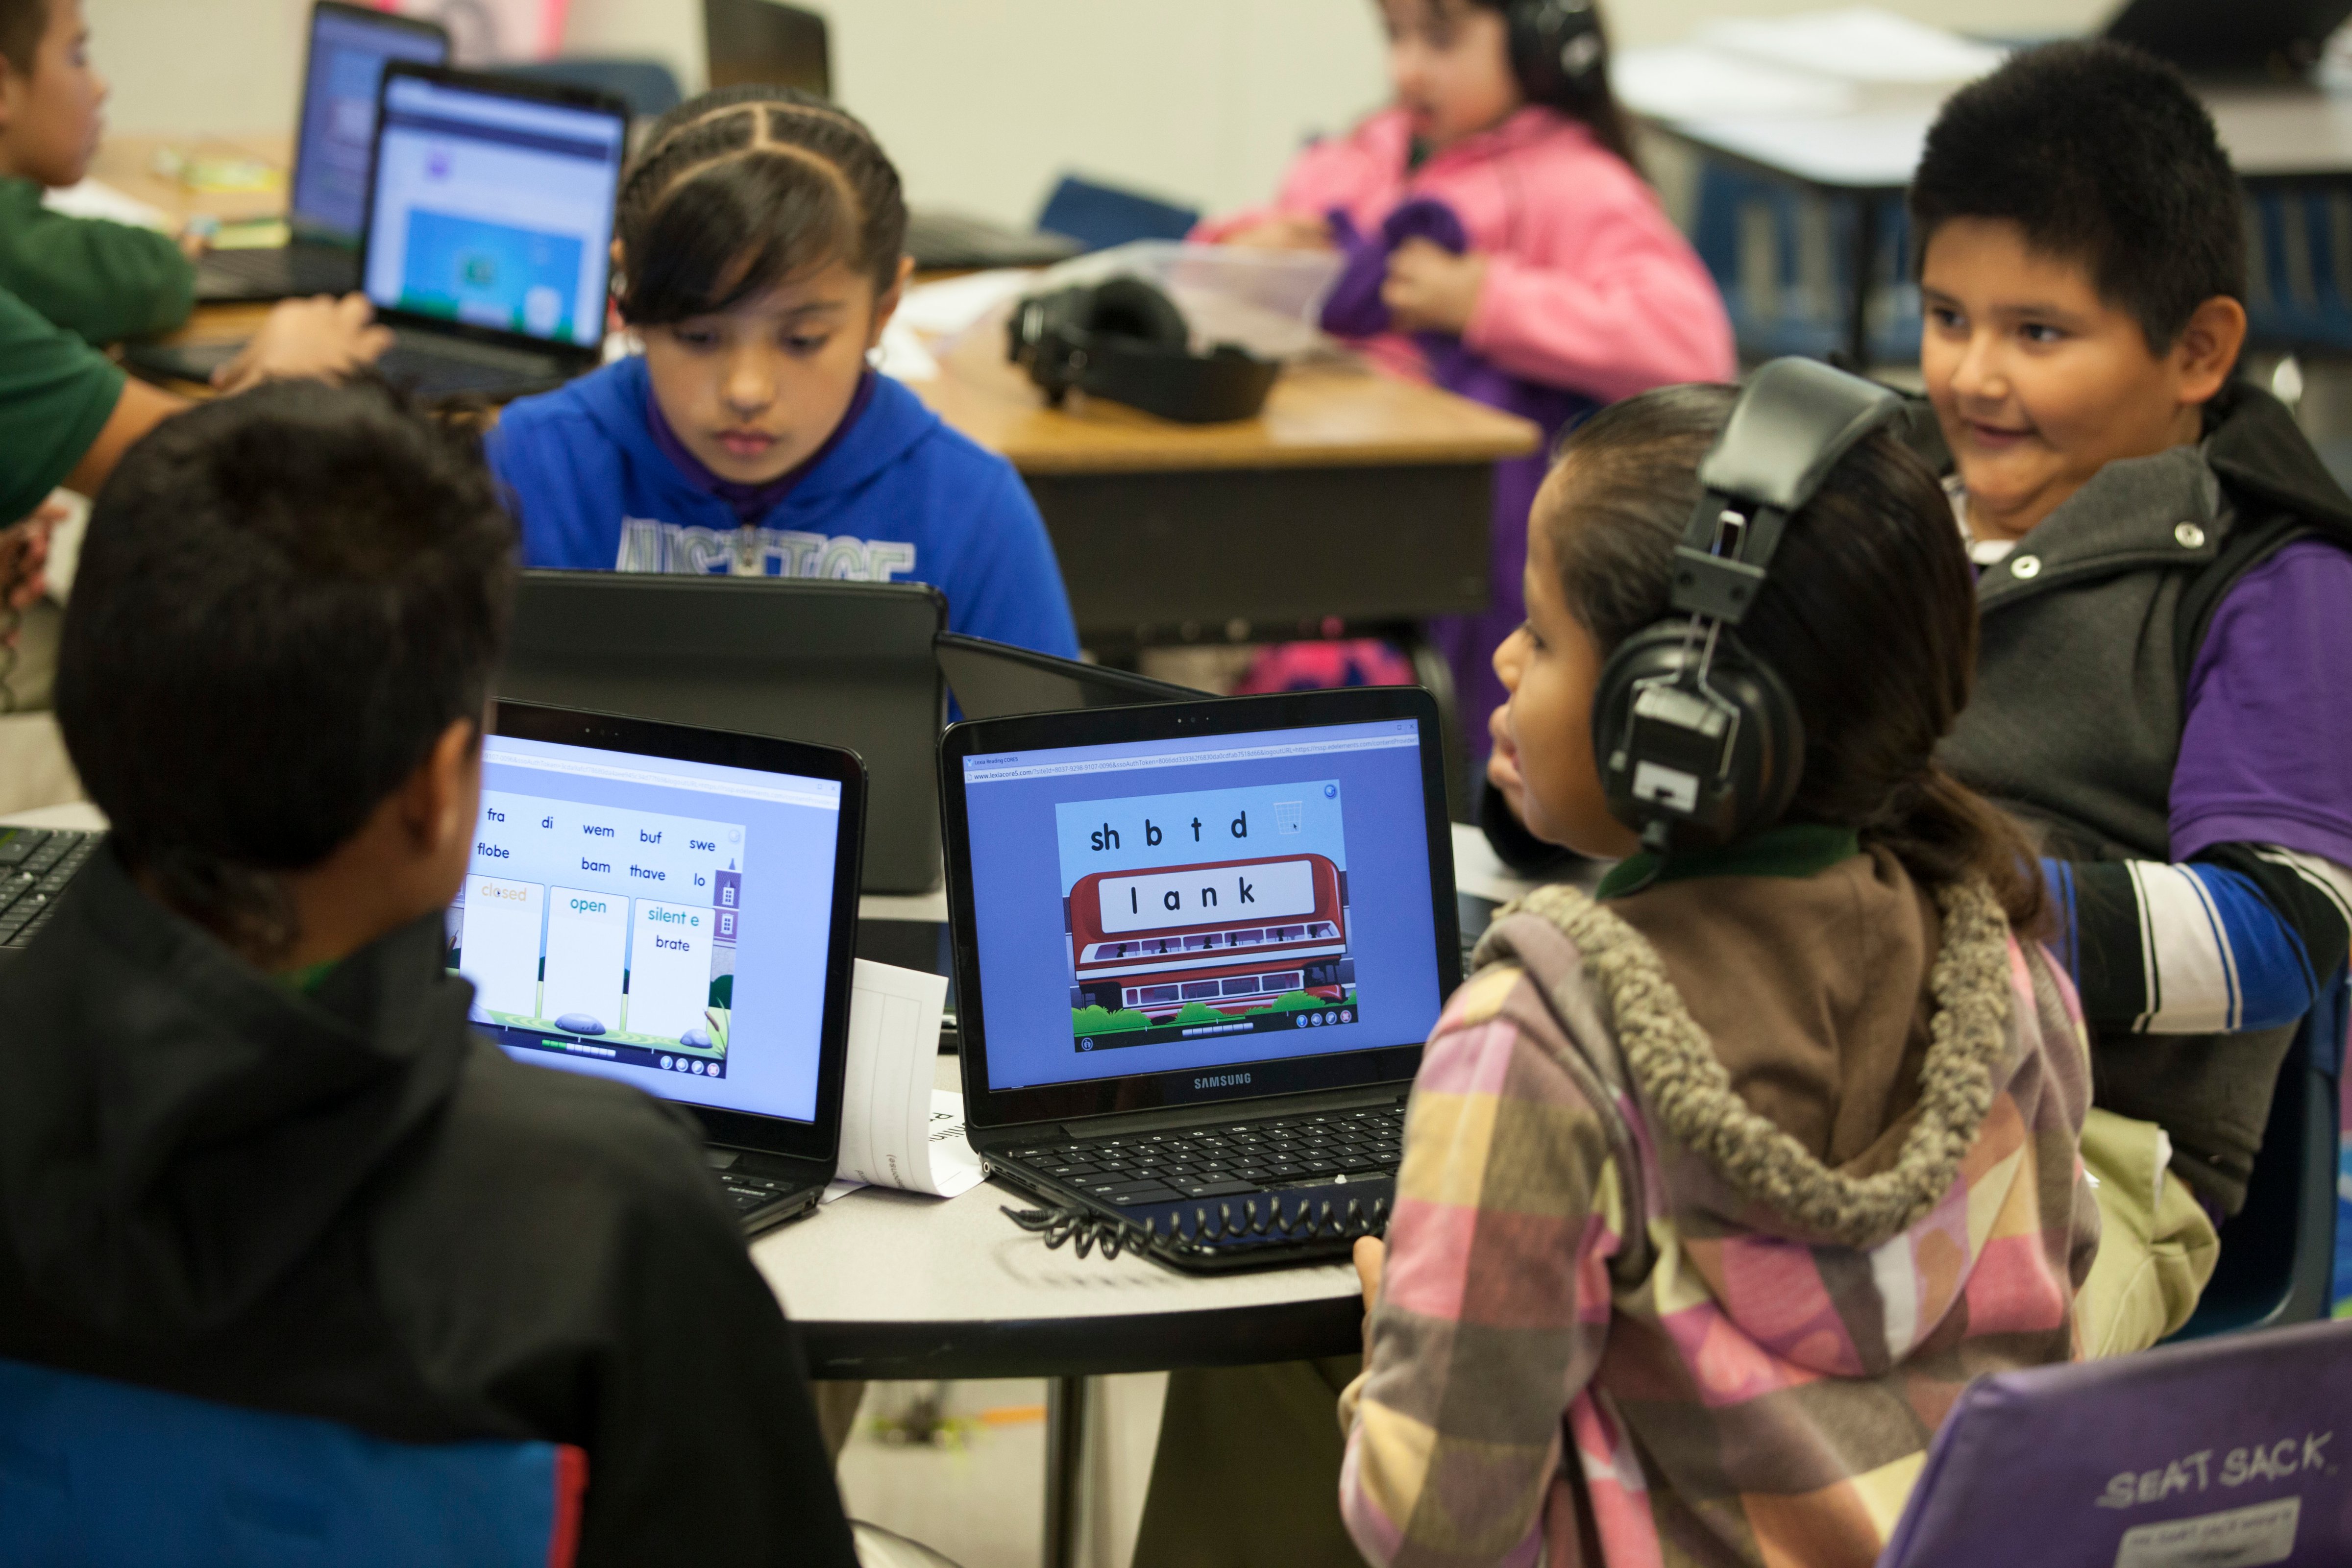 Fourth and fifth grade students at Rocketship SI Se Puede, a charter, public elementary school, use the internet and traditional classroom learning in one big open classroom, on Feb. 18, 2014 in San Jose, Calif. (Christian Science Monitor/Getty)